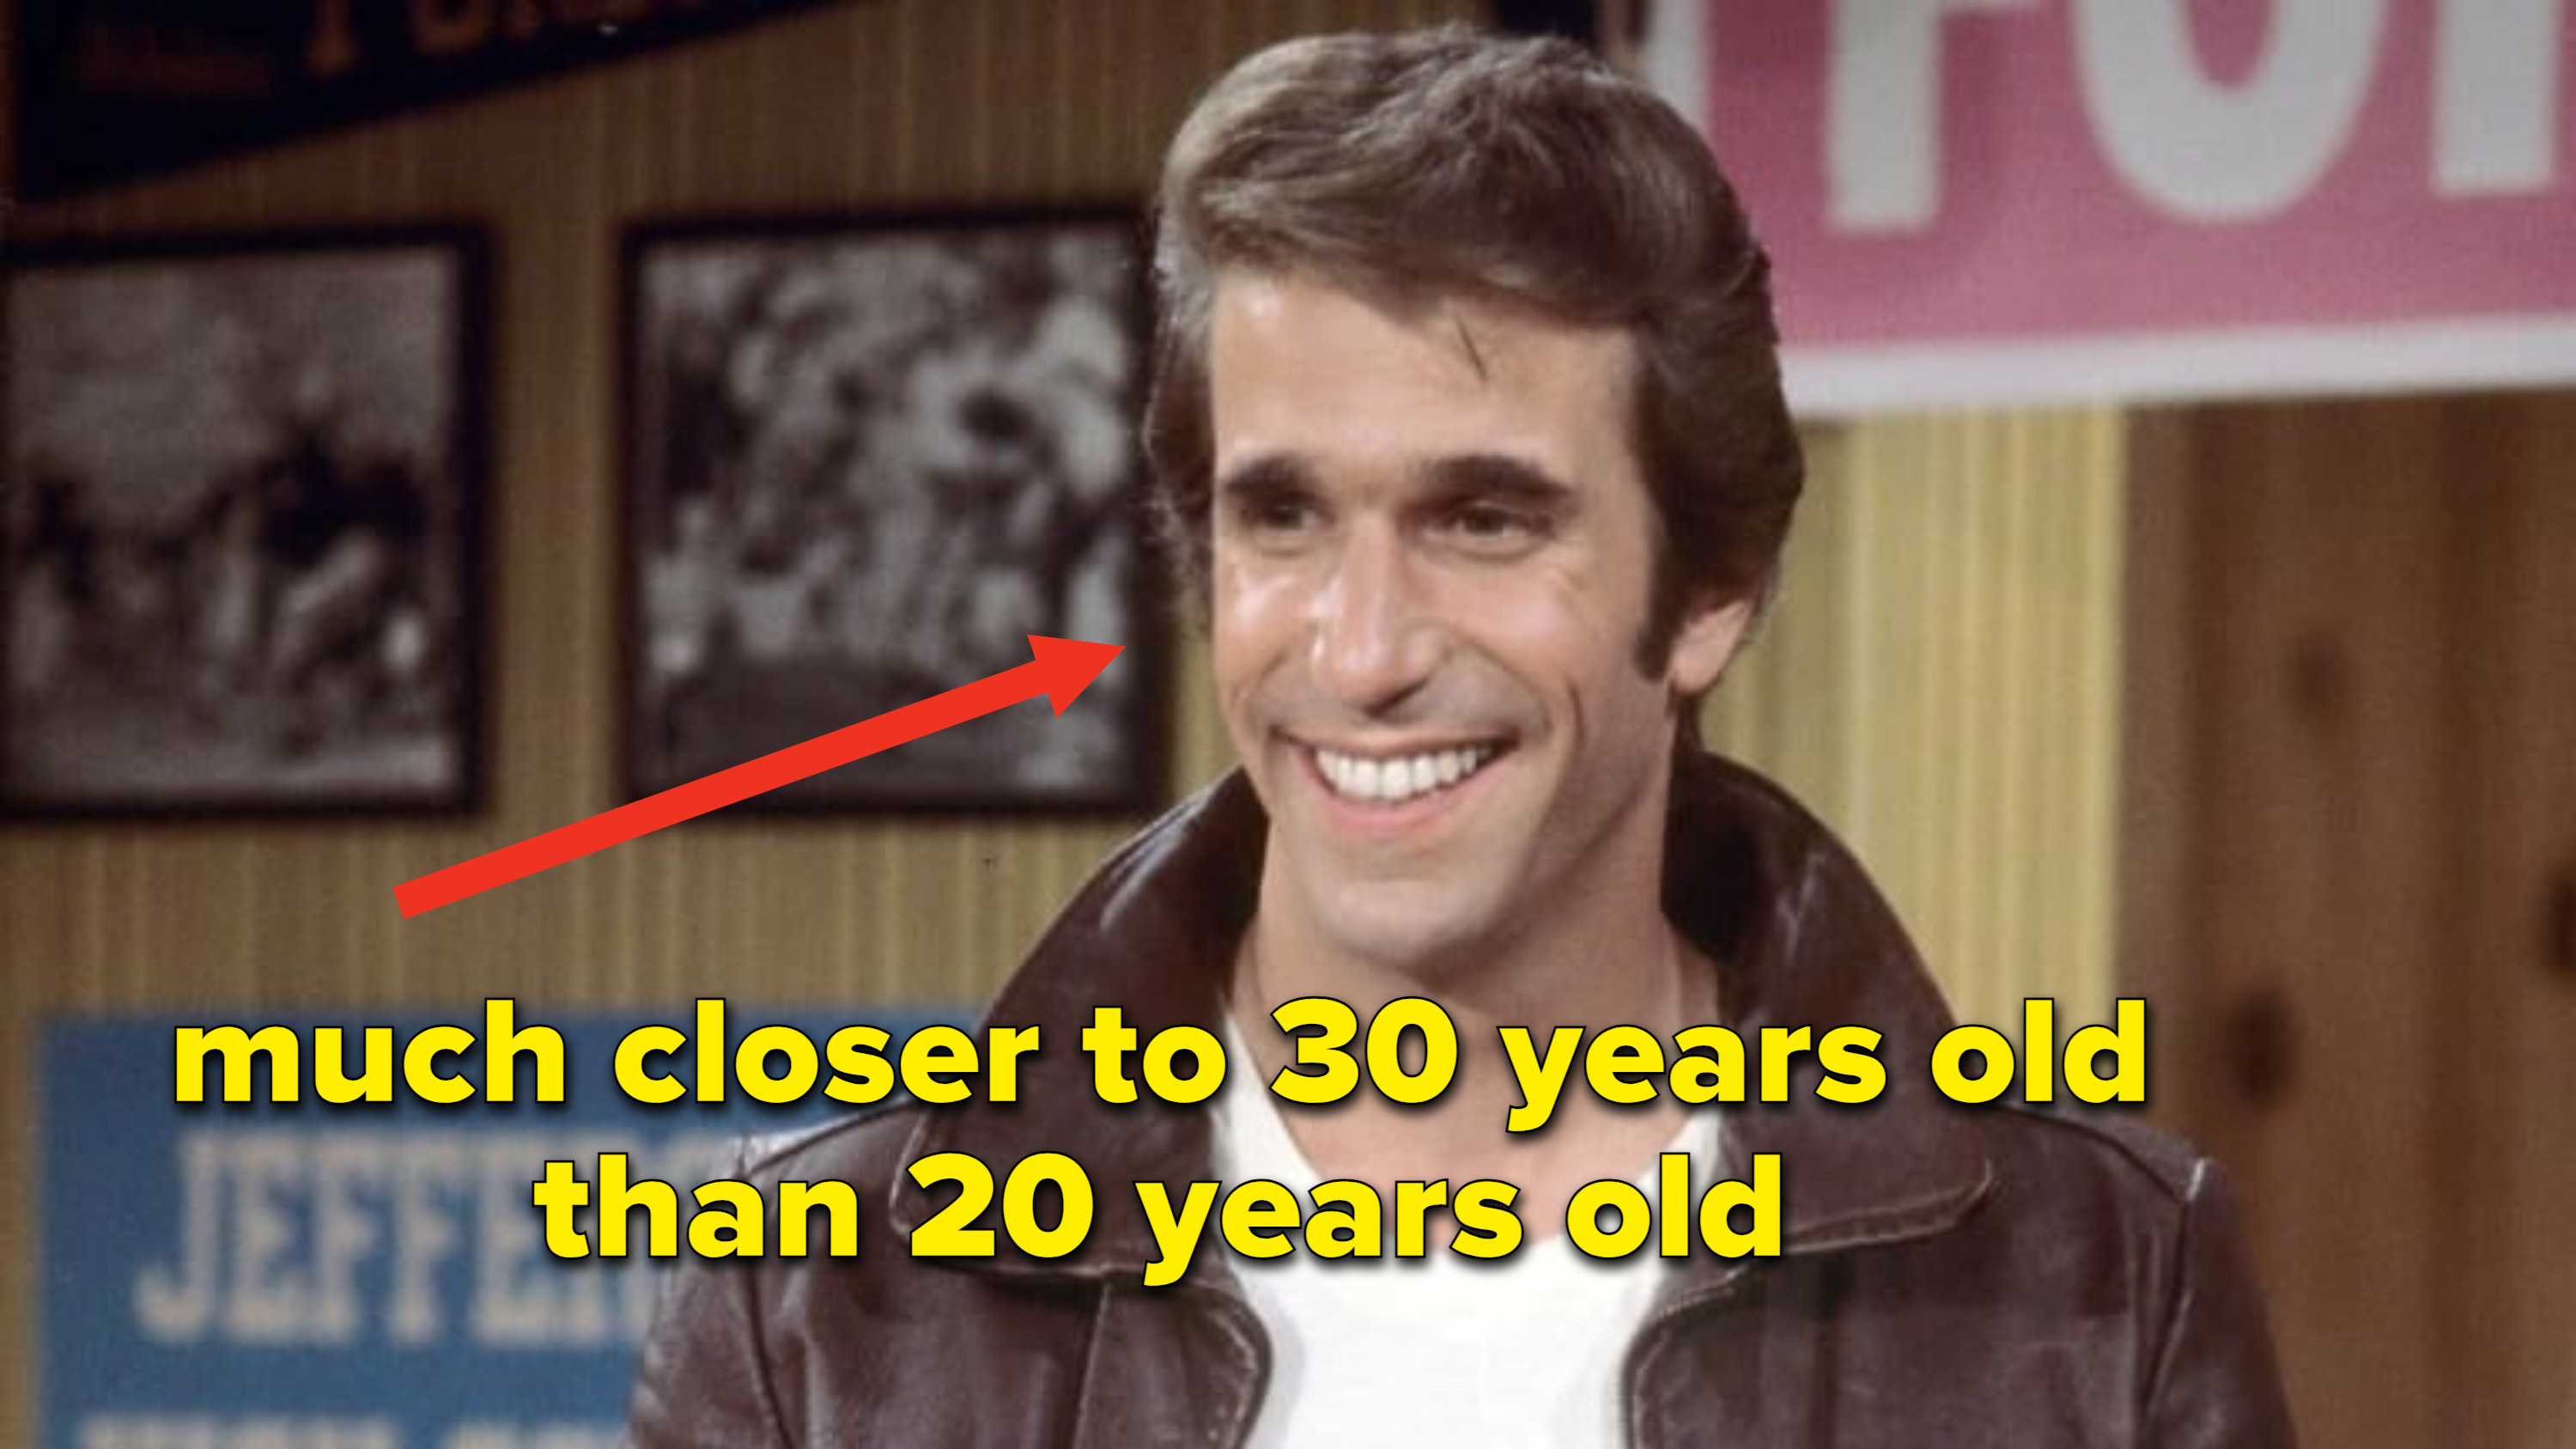 Henry Winkler was much closer to 30 years old than 20 years old